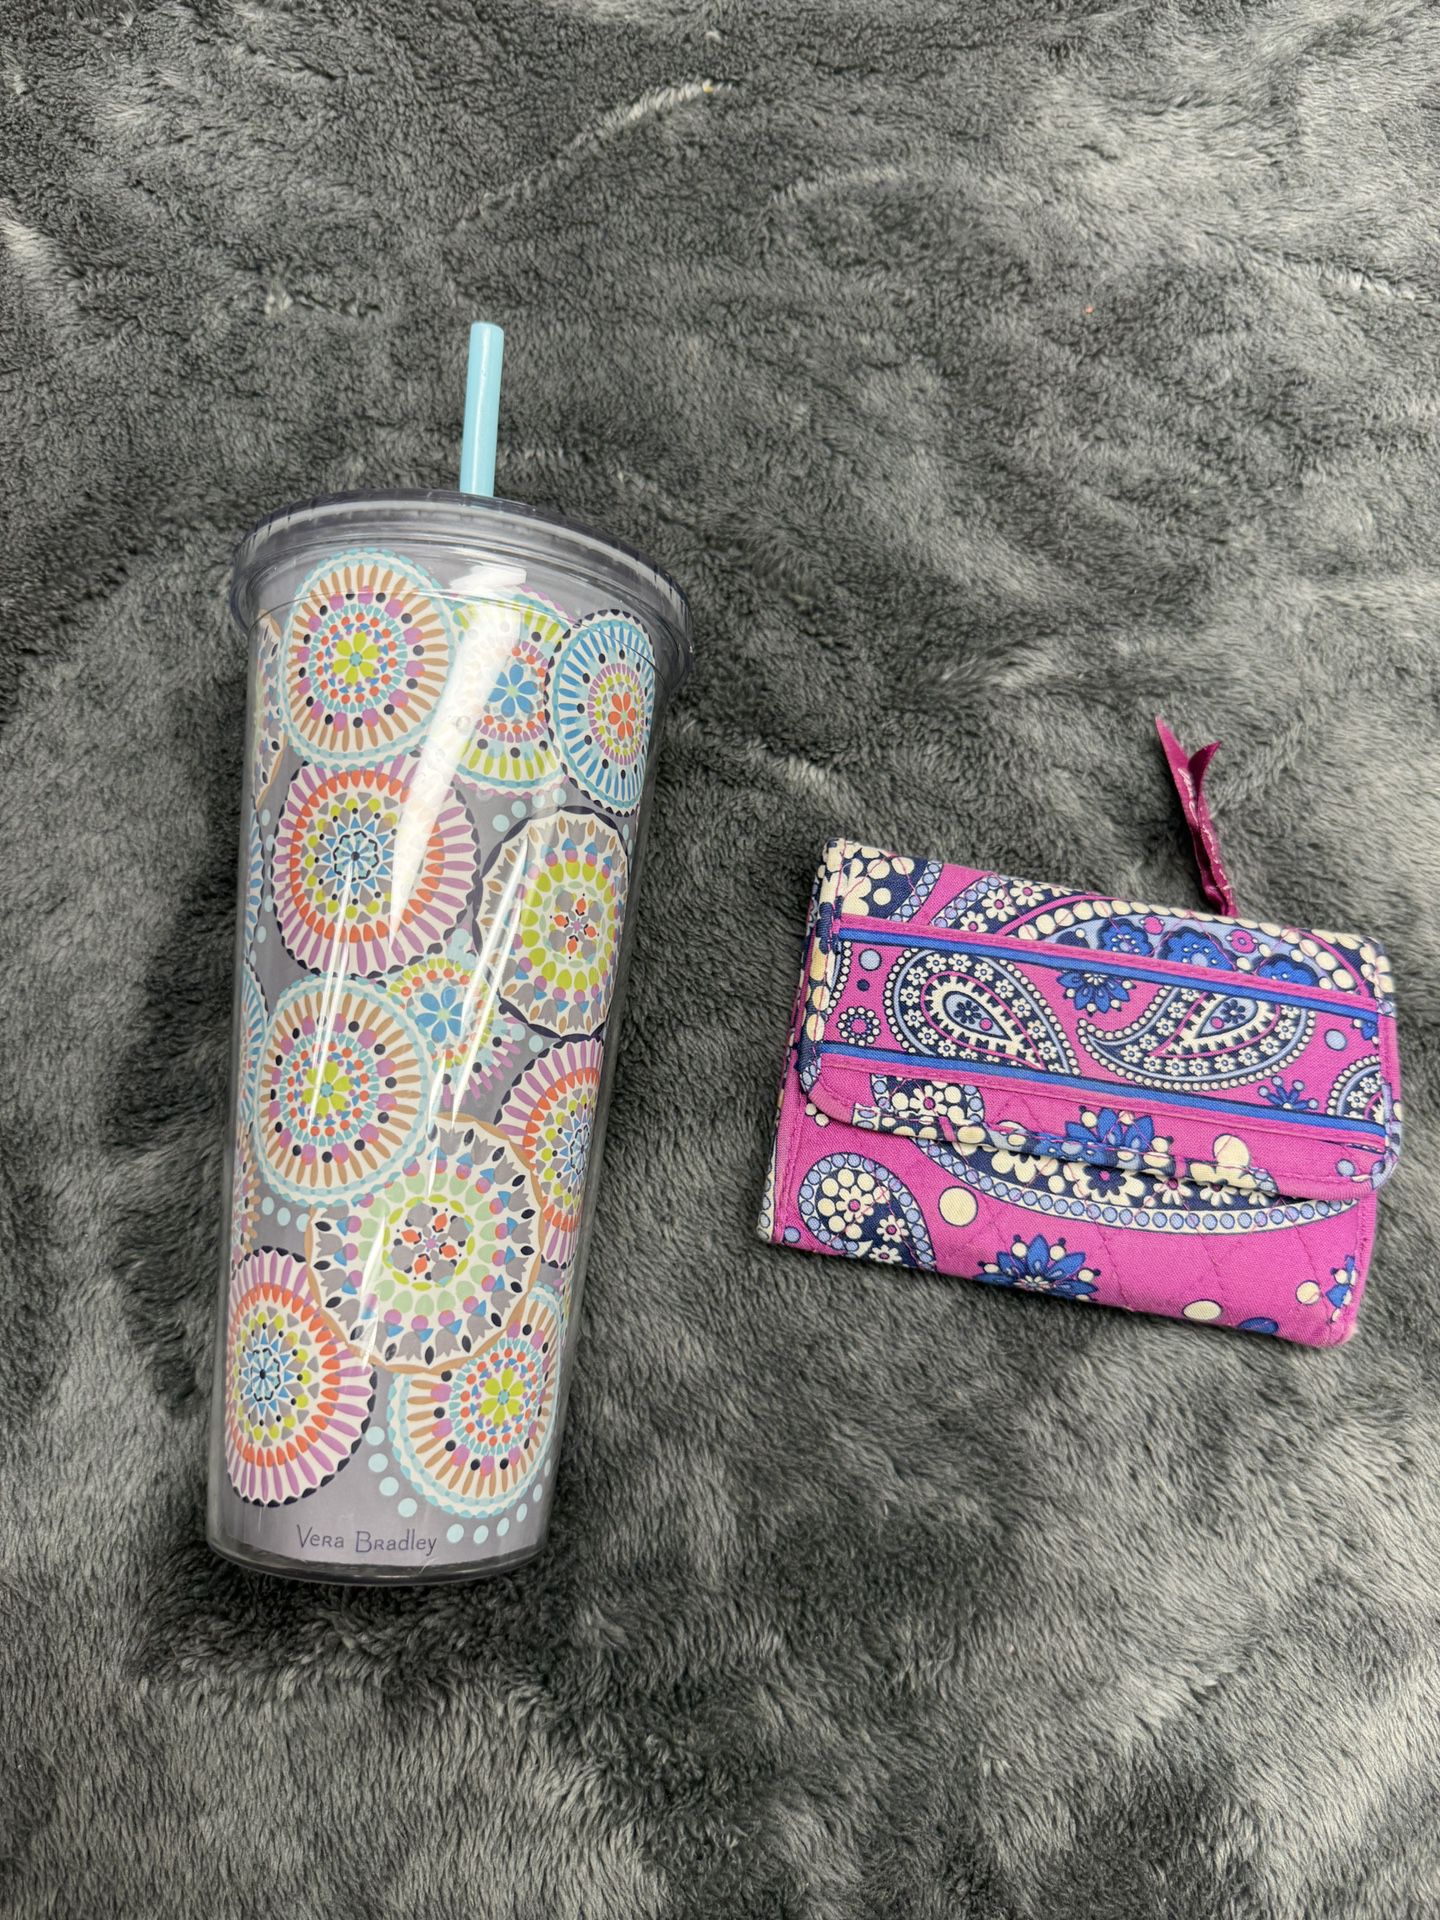 Bundle of Vera Bradley Wallet and Water Bottle with Straw in Excellent Shape!  